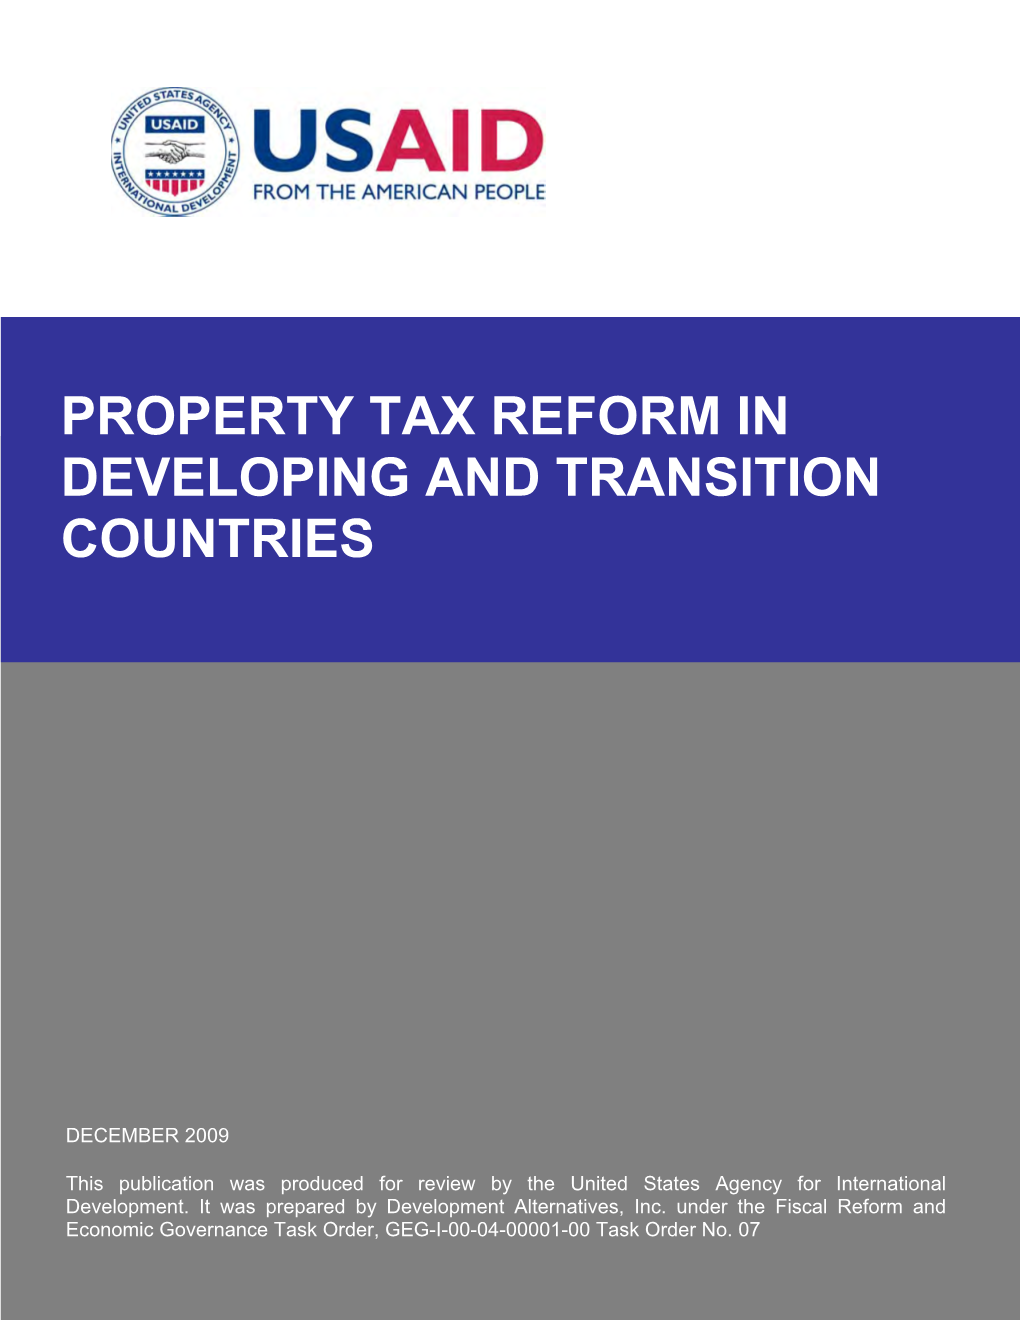 Property Tax Reform in Developing and Transition Countries